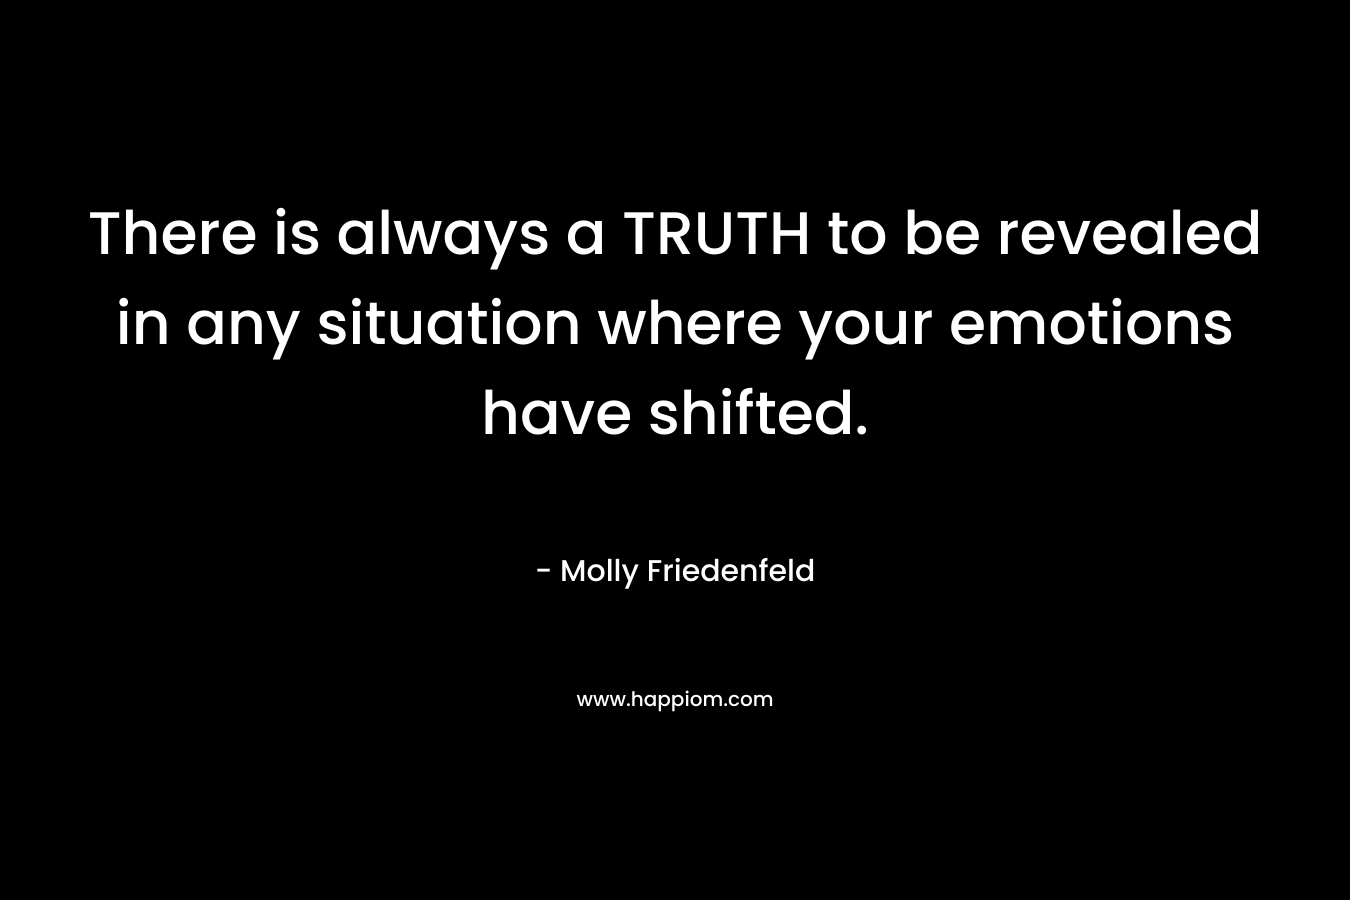 There is always a TRUTH to be revealed in any situation where your emotions have shifted.